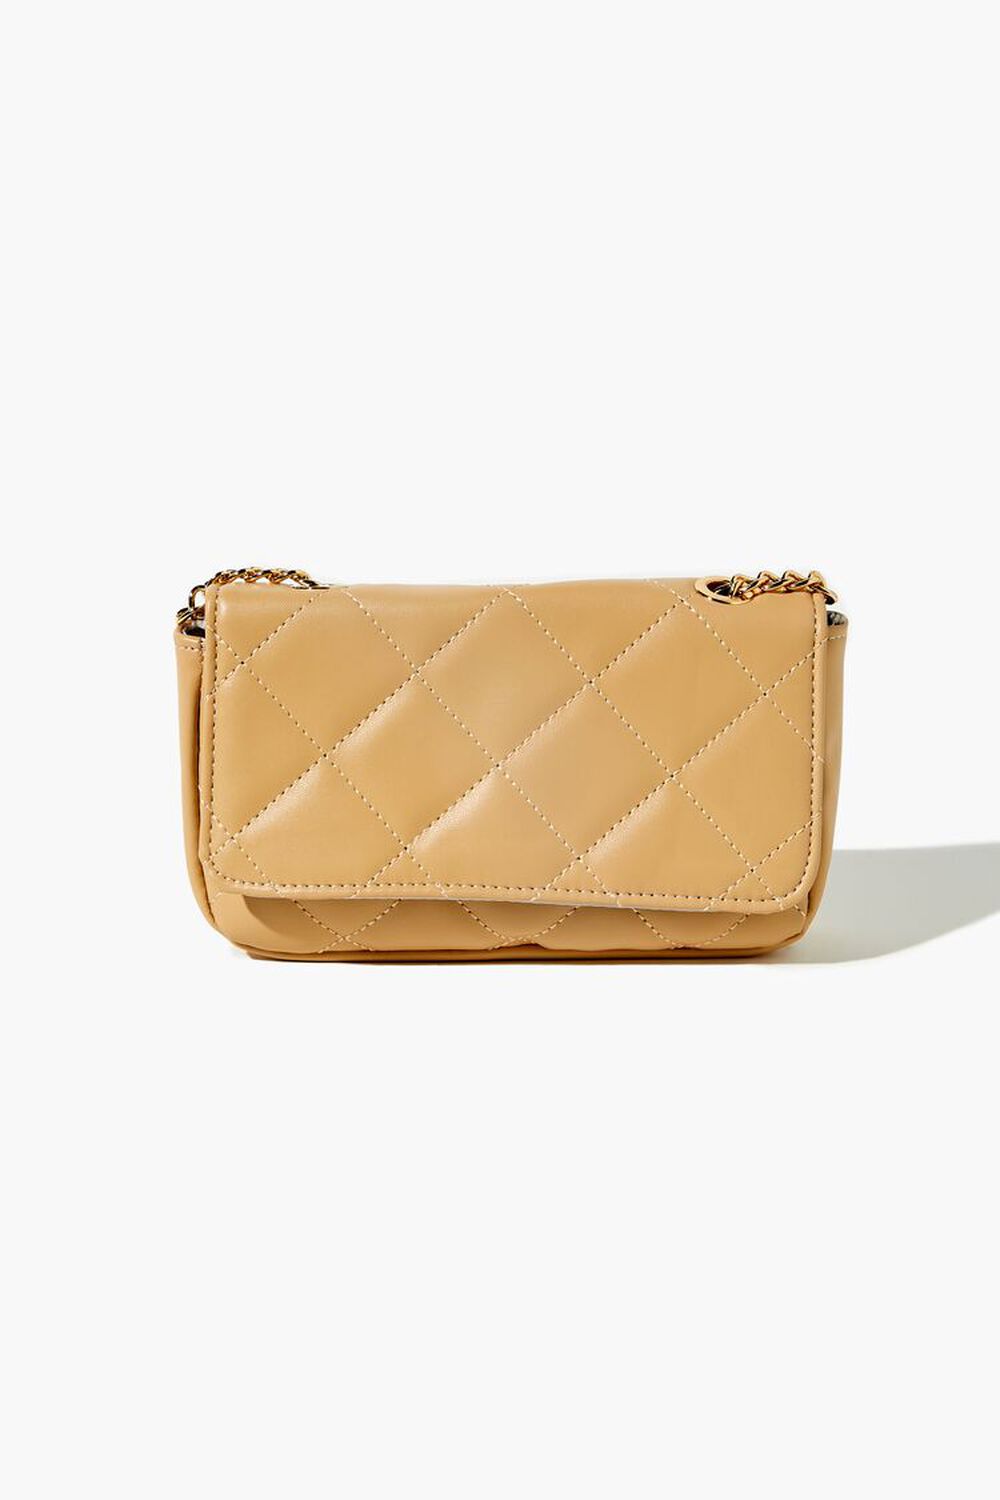 TAUPE Quilted Faux Leather Crossbody Bag, image 1